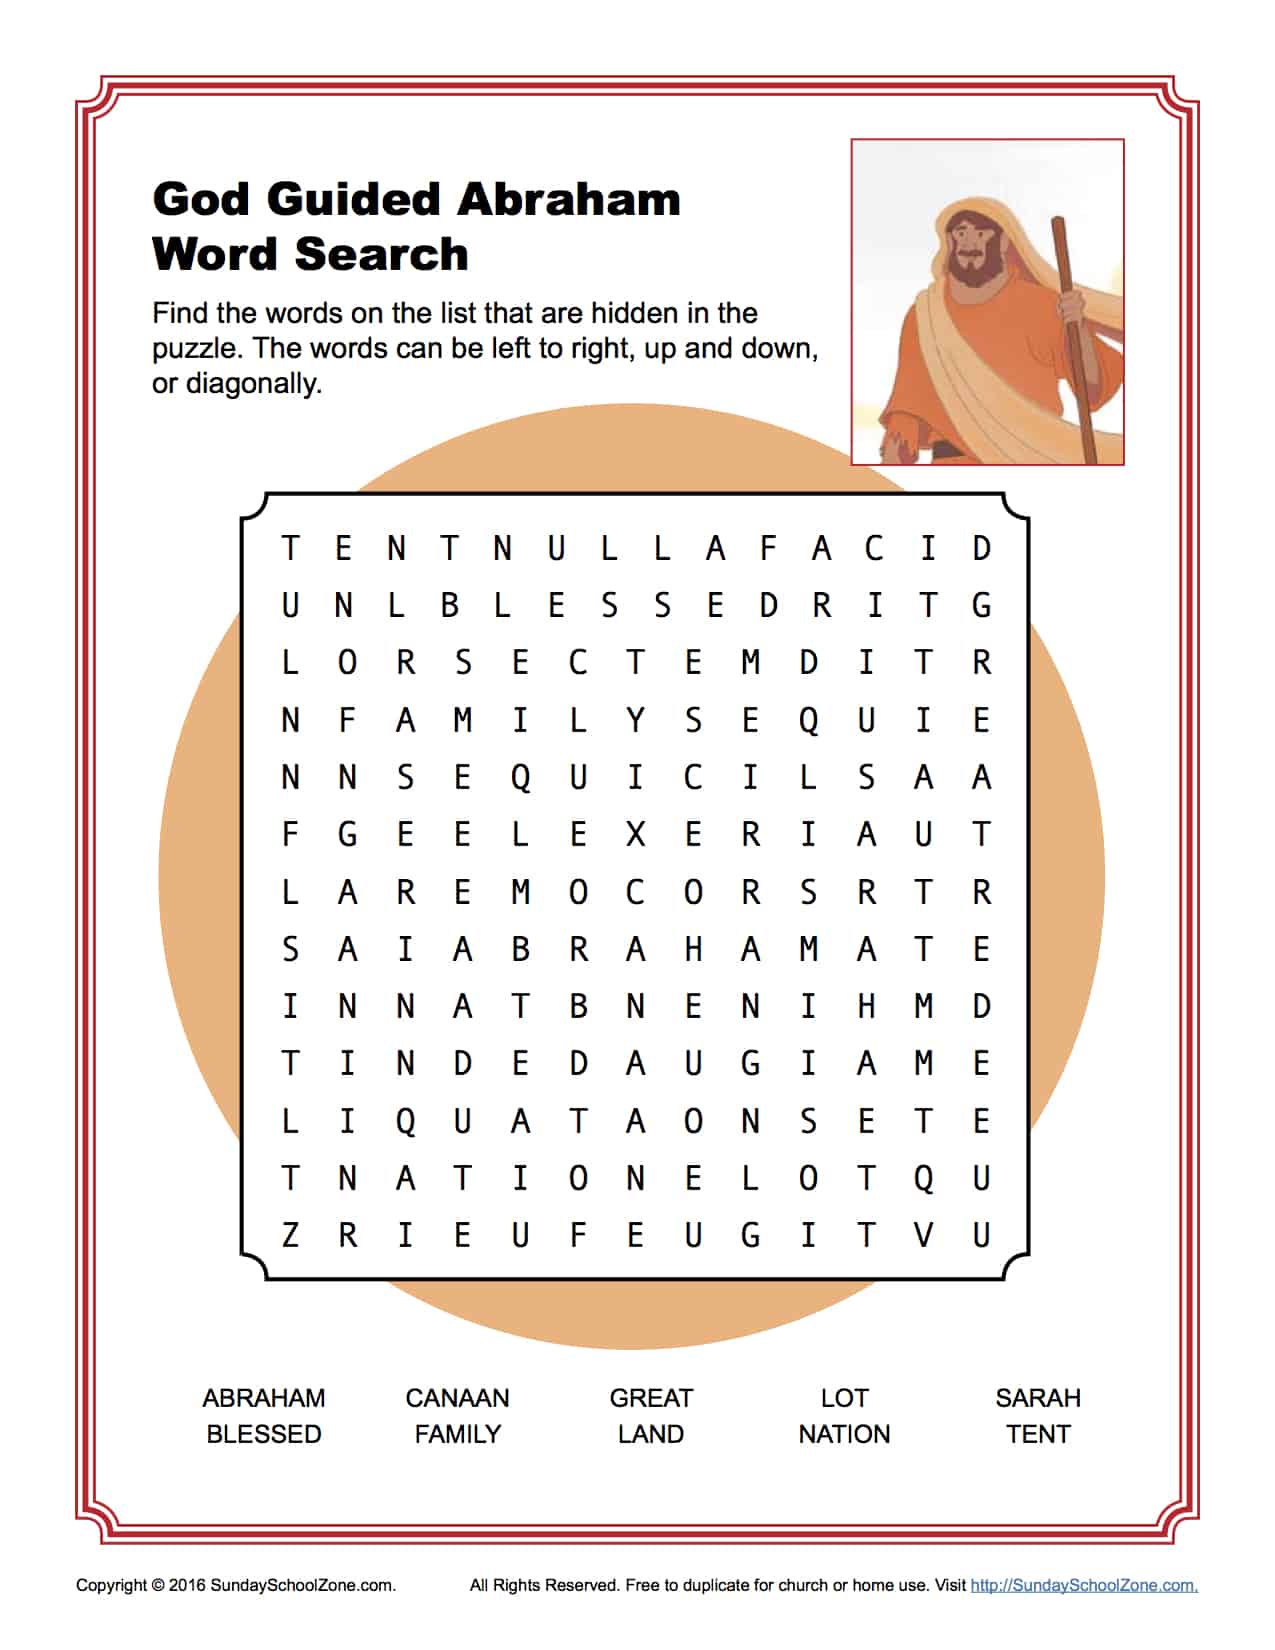 God Guided Abraham Word Search Children's Bible Activities Sunday